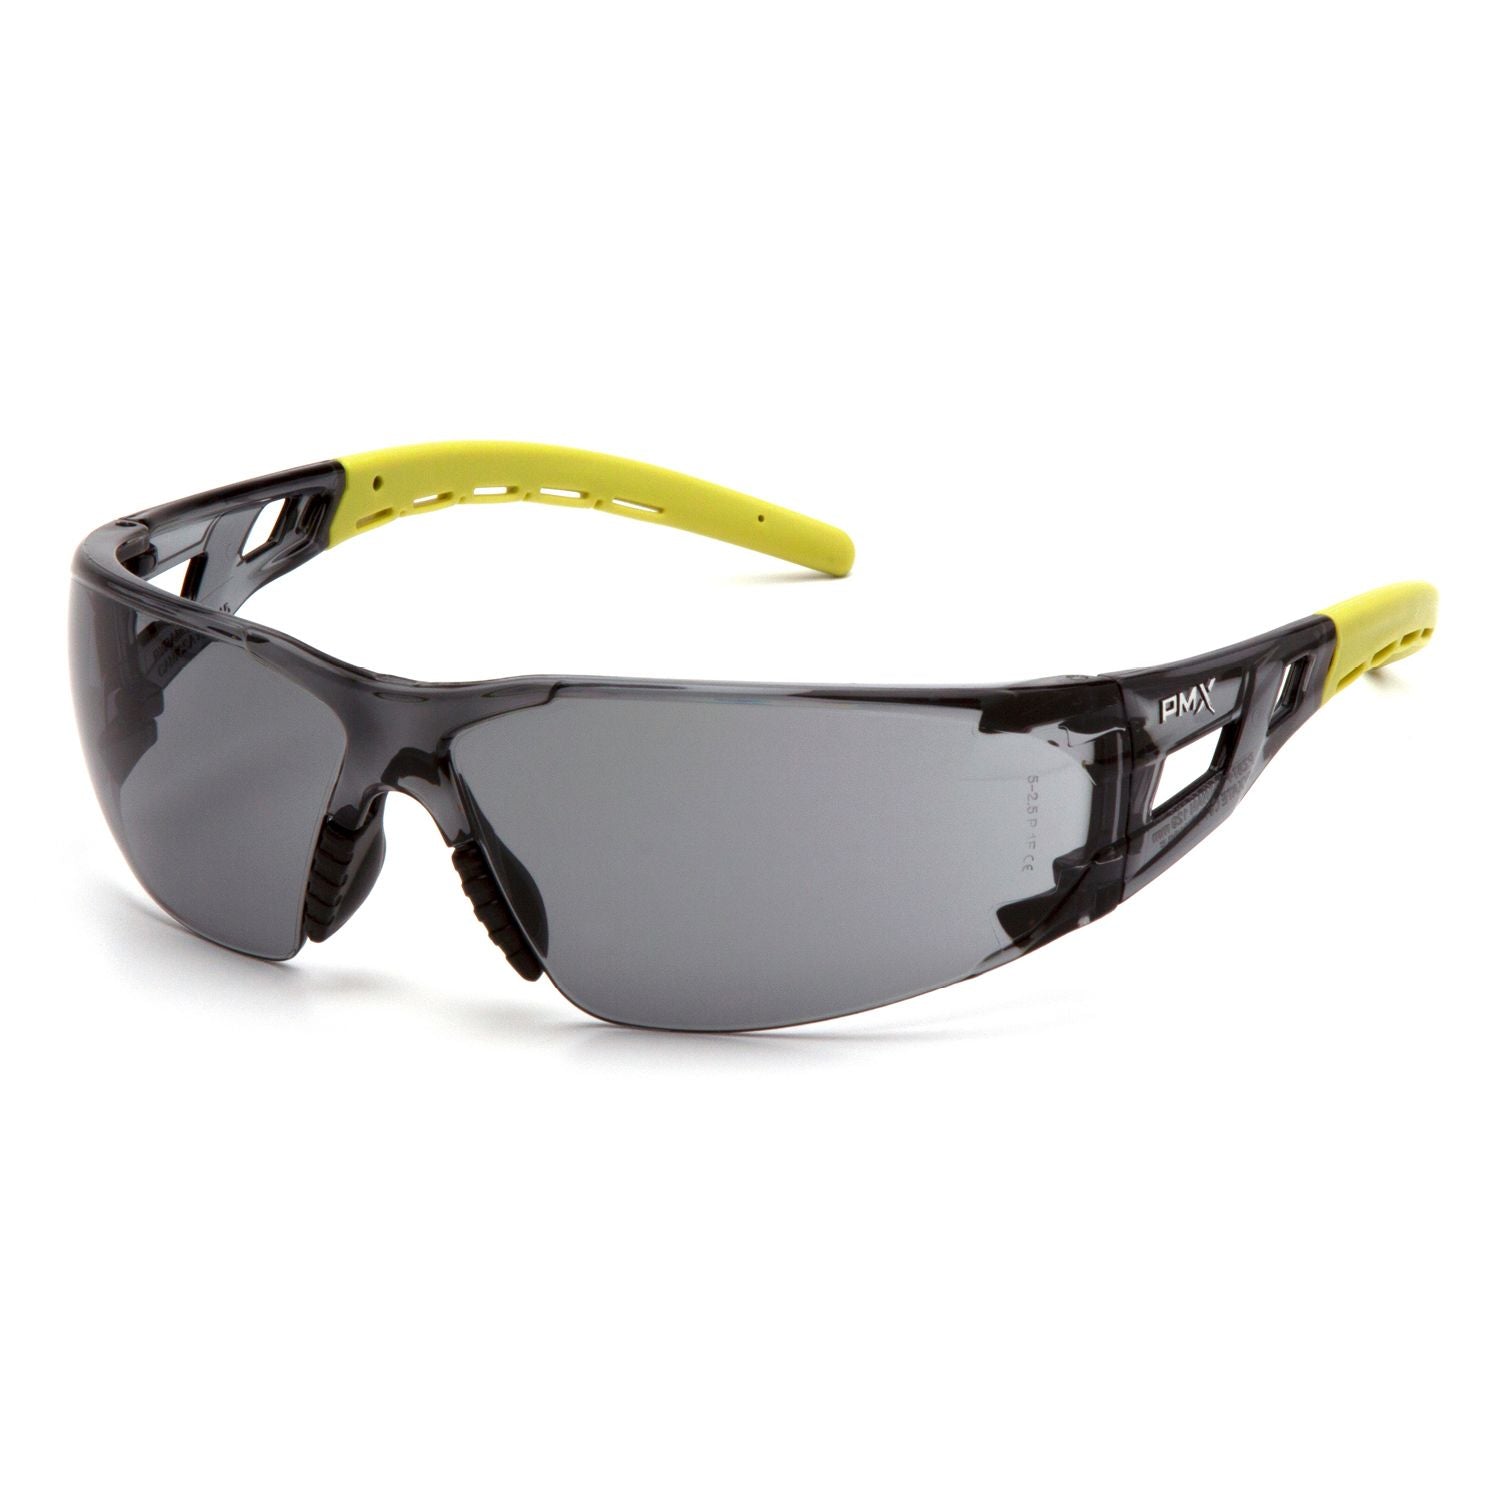 Supertouch Pyramex Fyxate Grey Lens Anti-Fog Safety Spectacle